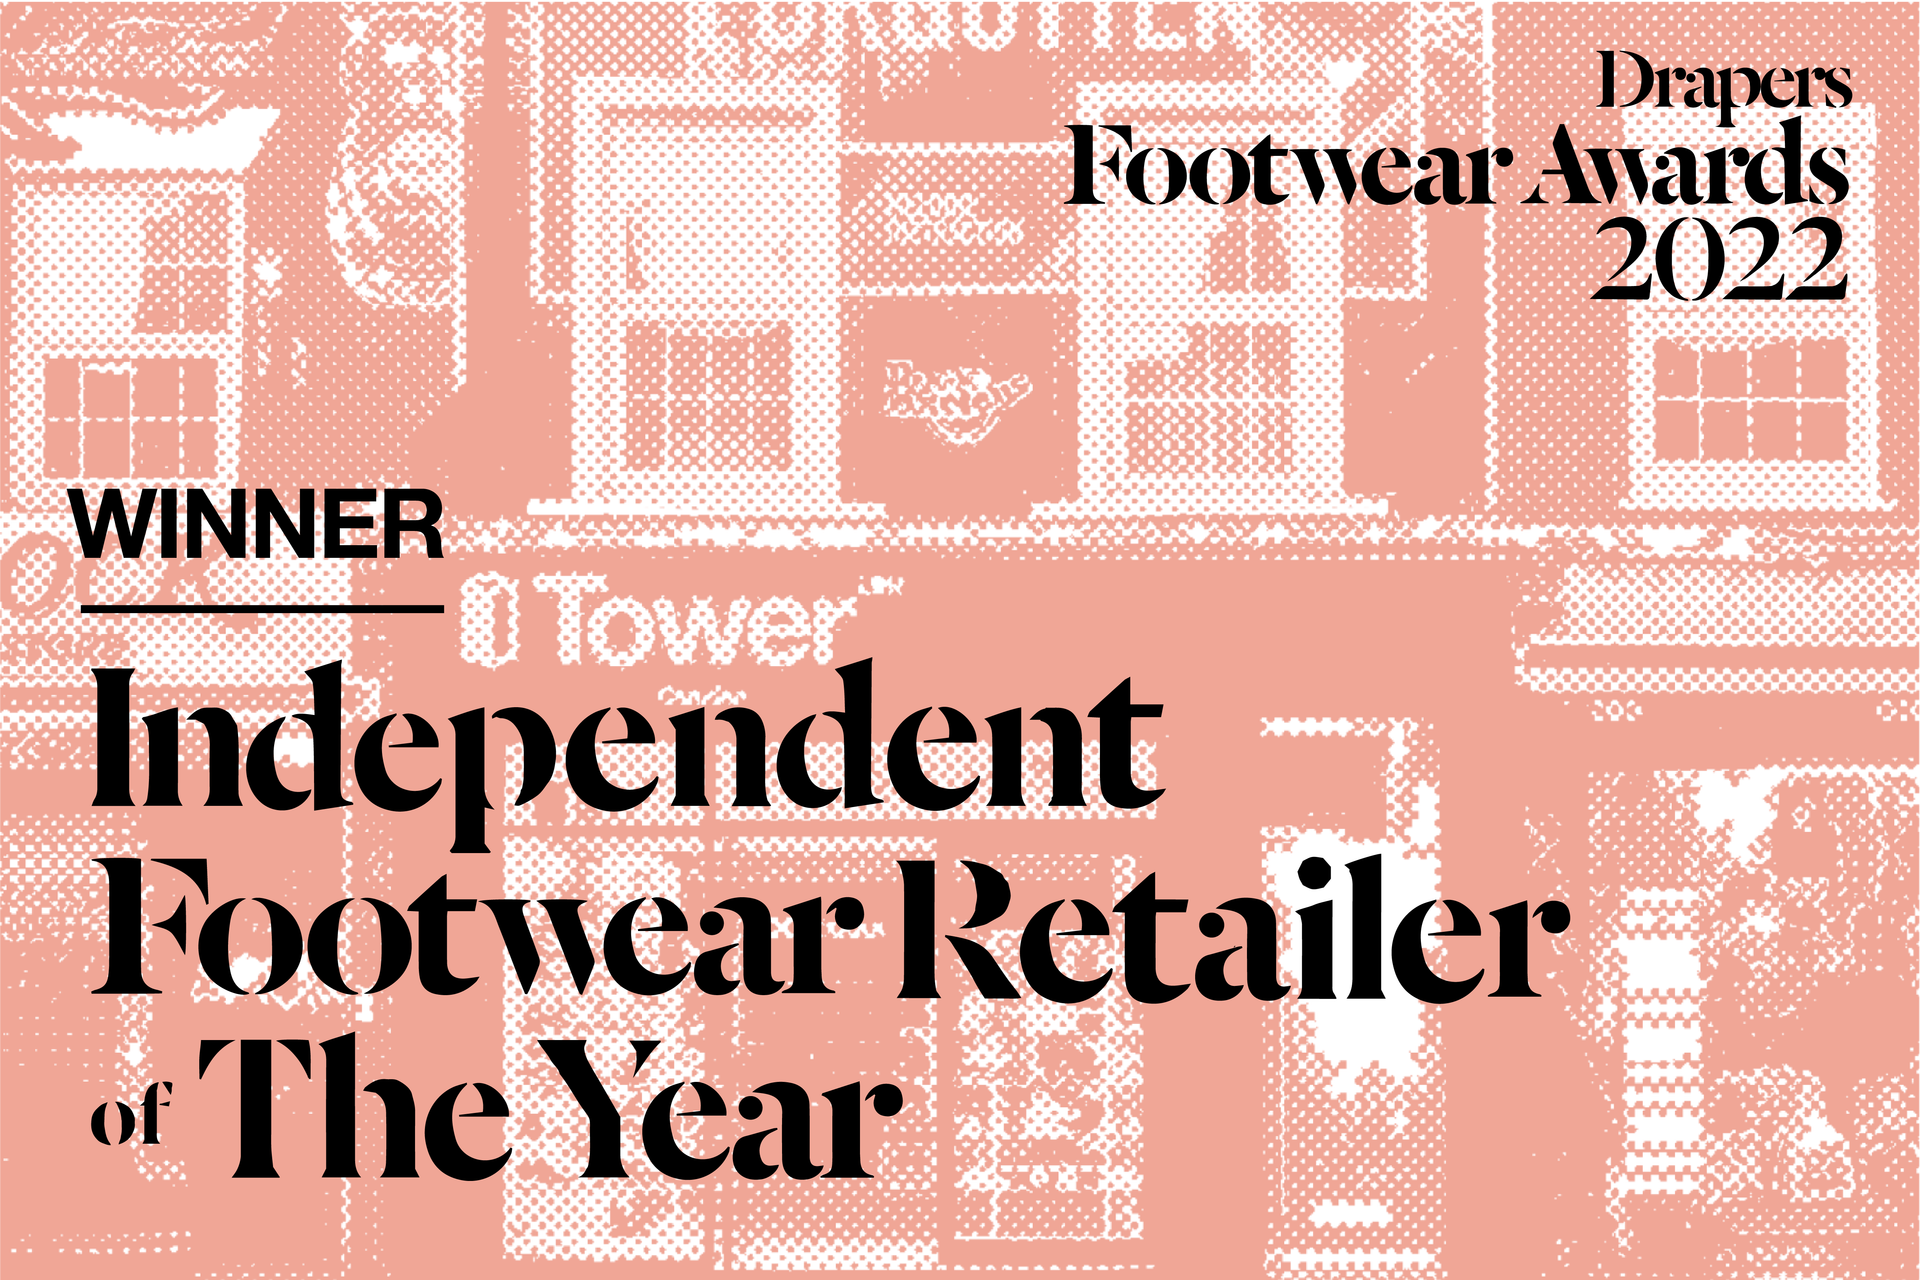 TOWER Family: Independent Footwear Retailer of the year!